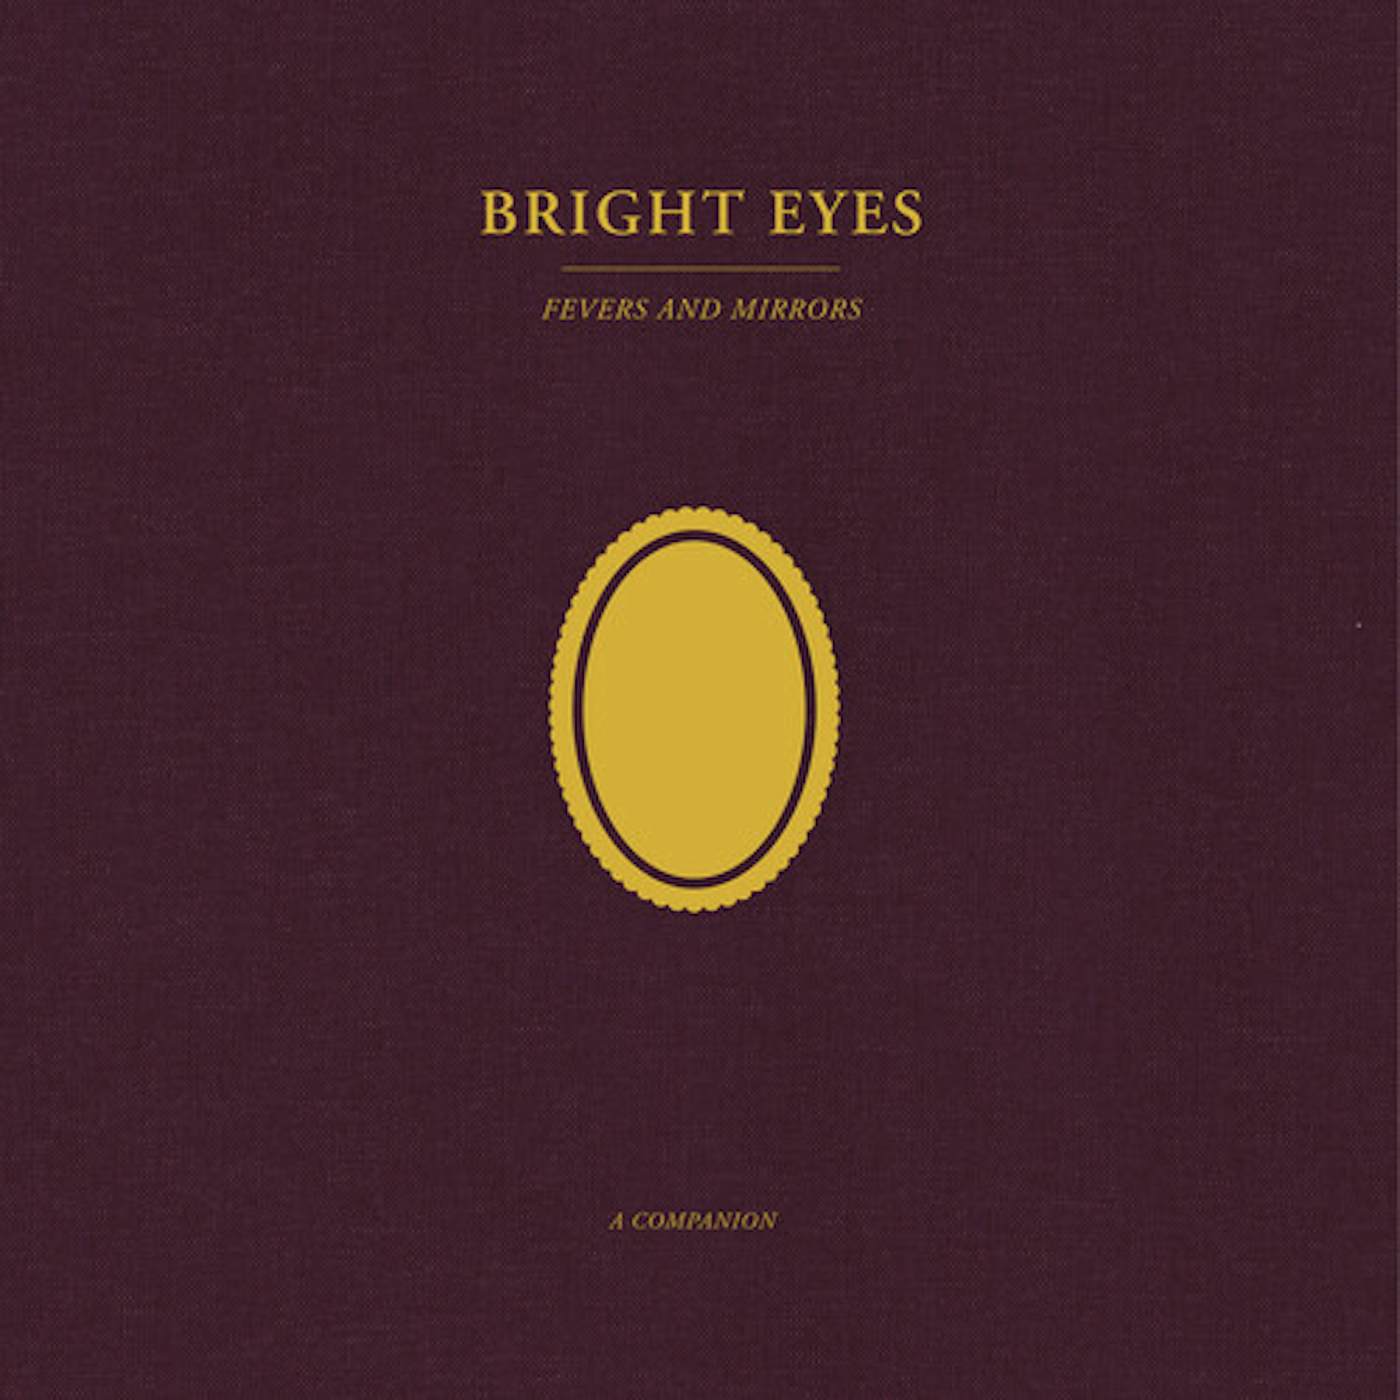 Oh Holy Fools - The Music of Son, Ambulance and Bright Eyes